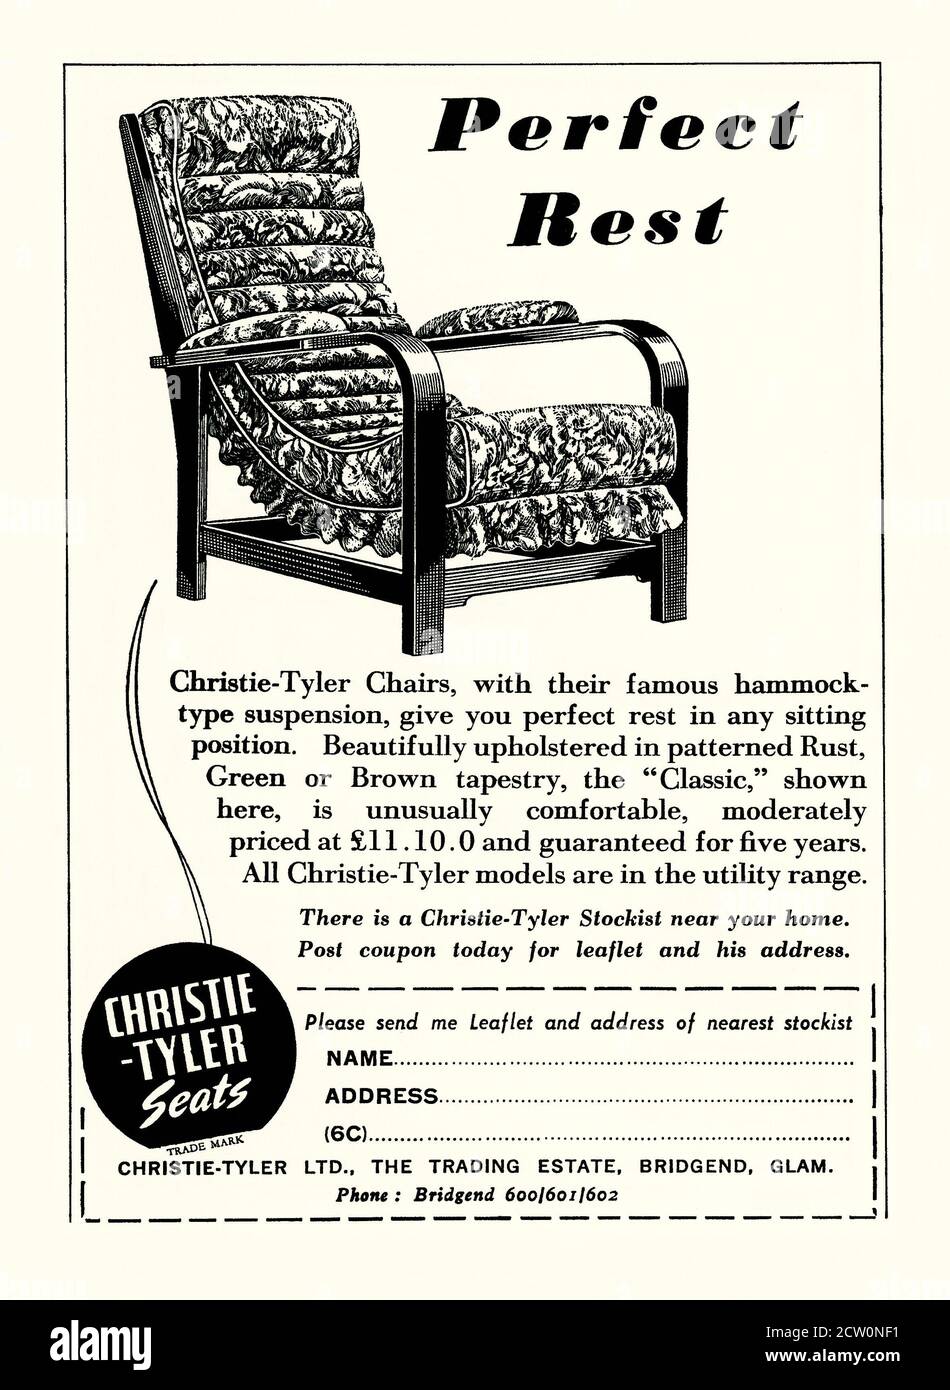 A 1951 magazine advert for Christie-Tyler armchairs. The ‘utility’ chair has hammock style suspension for ‘perfect rest’. Christie-Tyler was established in 1933 and became one of the UK's largest furniture manufacturers. It was based in Bridgend, Glamorgan, Wales, UK. Products include living- and dining-room sets, and bedroom sets. The company fell into administration in 2005. It underwent a management buyout – vintage 1950s graphics. Stock Photo